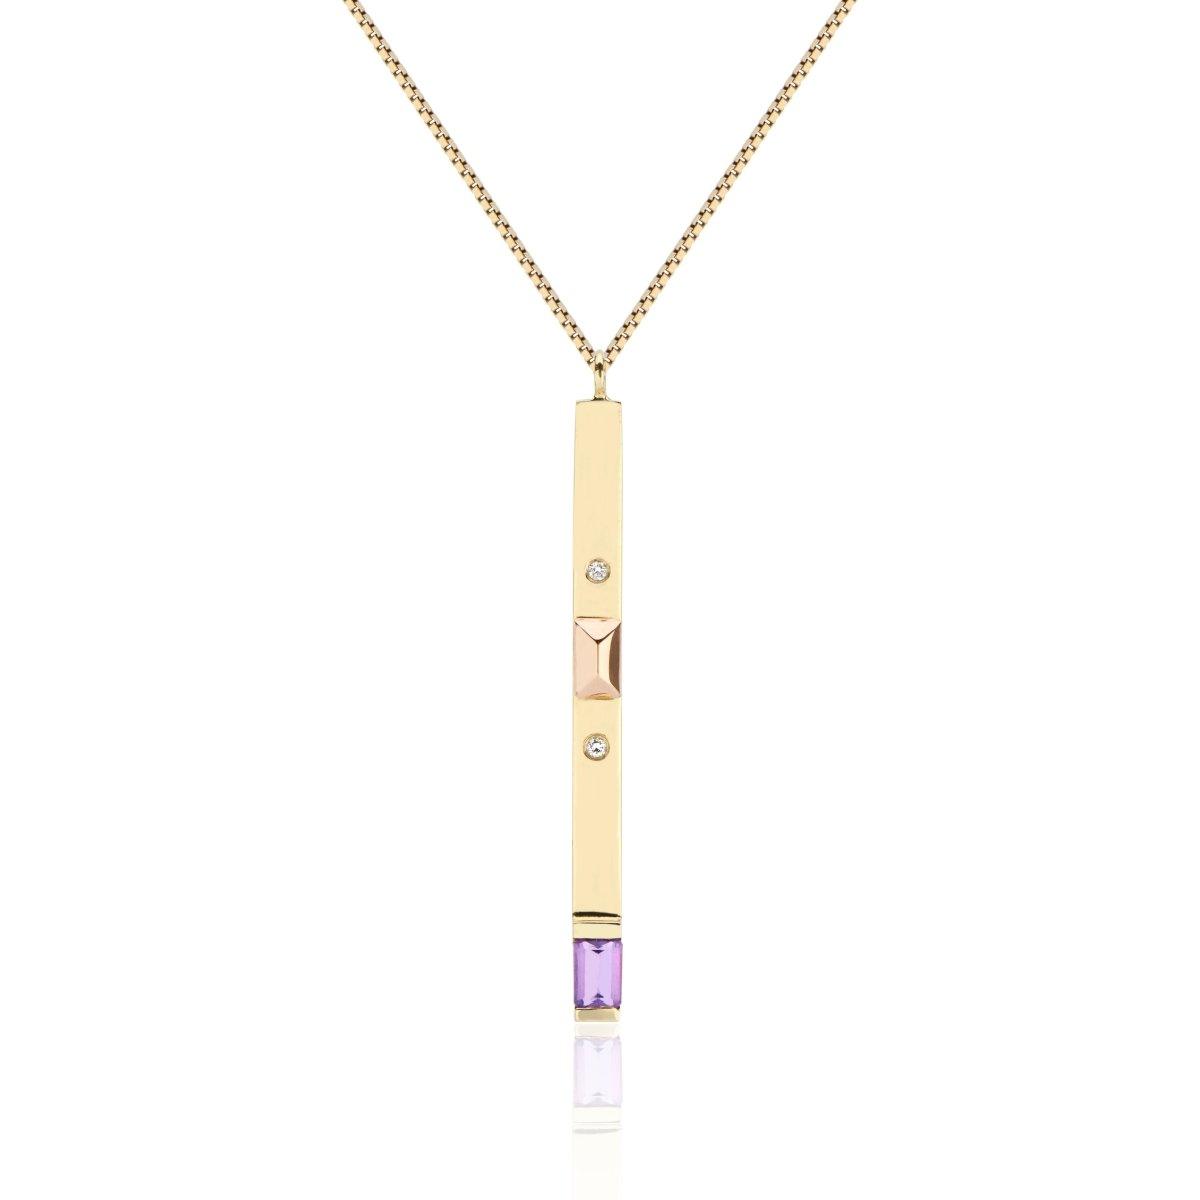 Deluxe Fire Matchstick Pendant - Nataly Aponte